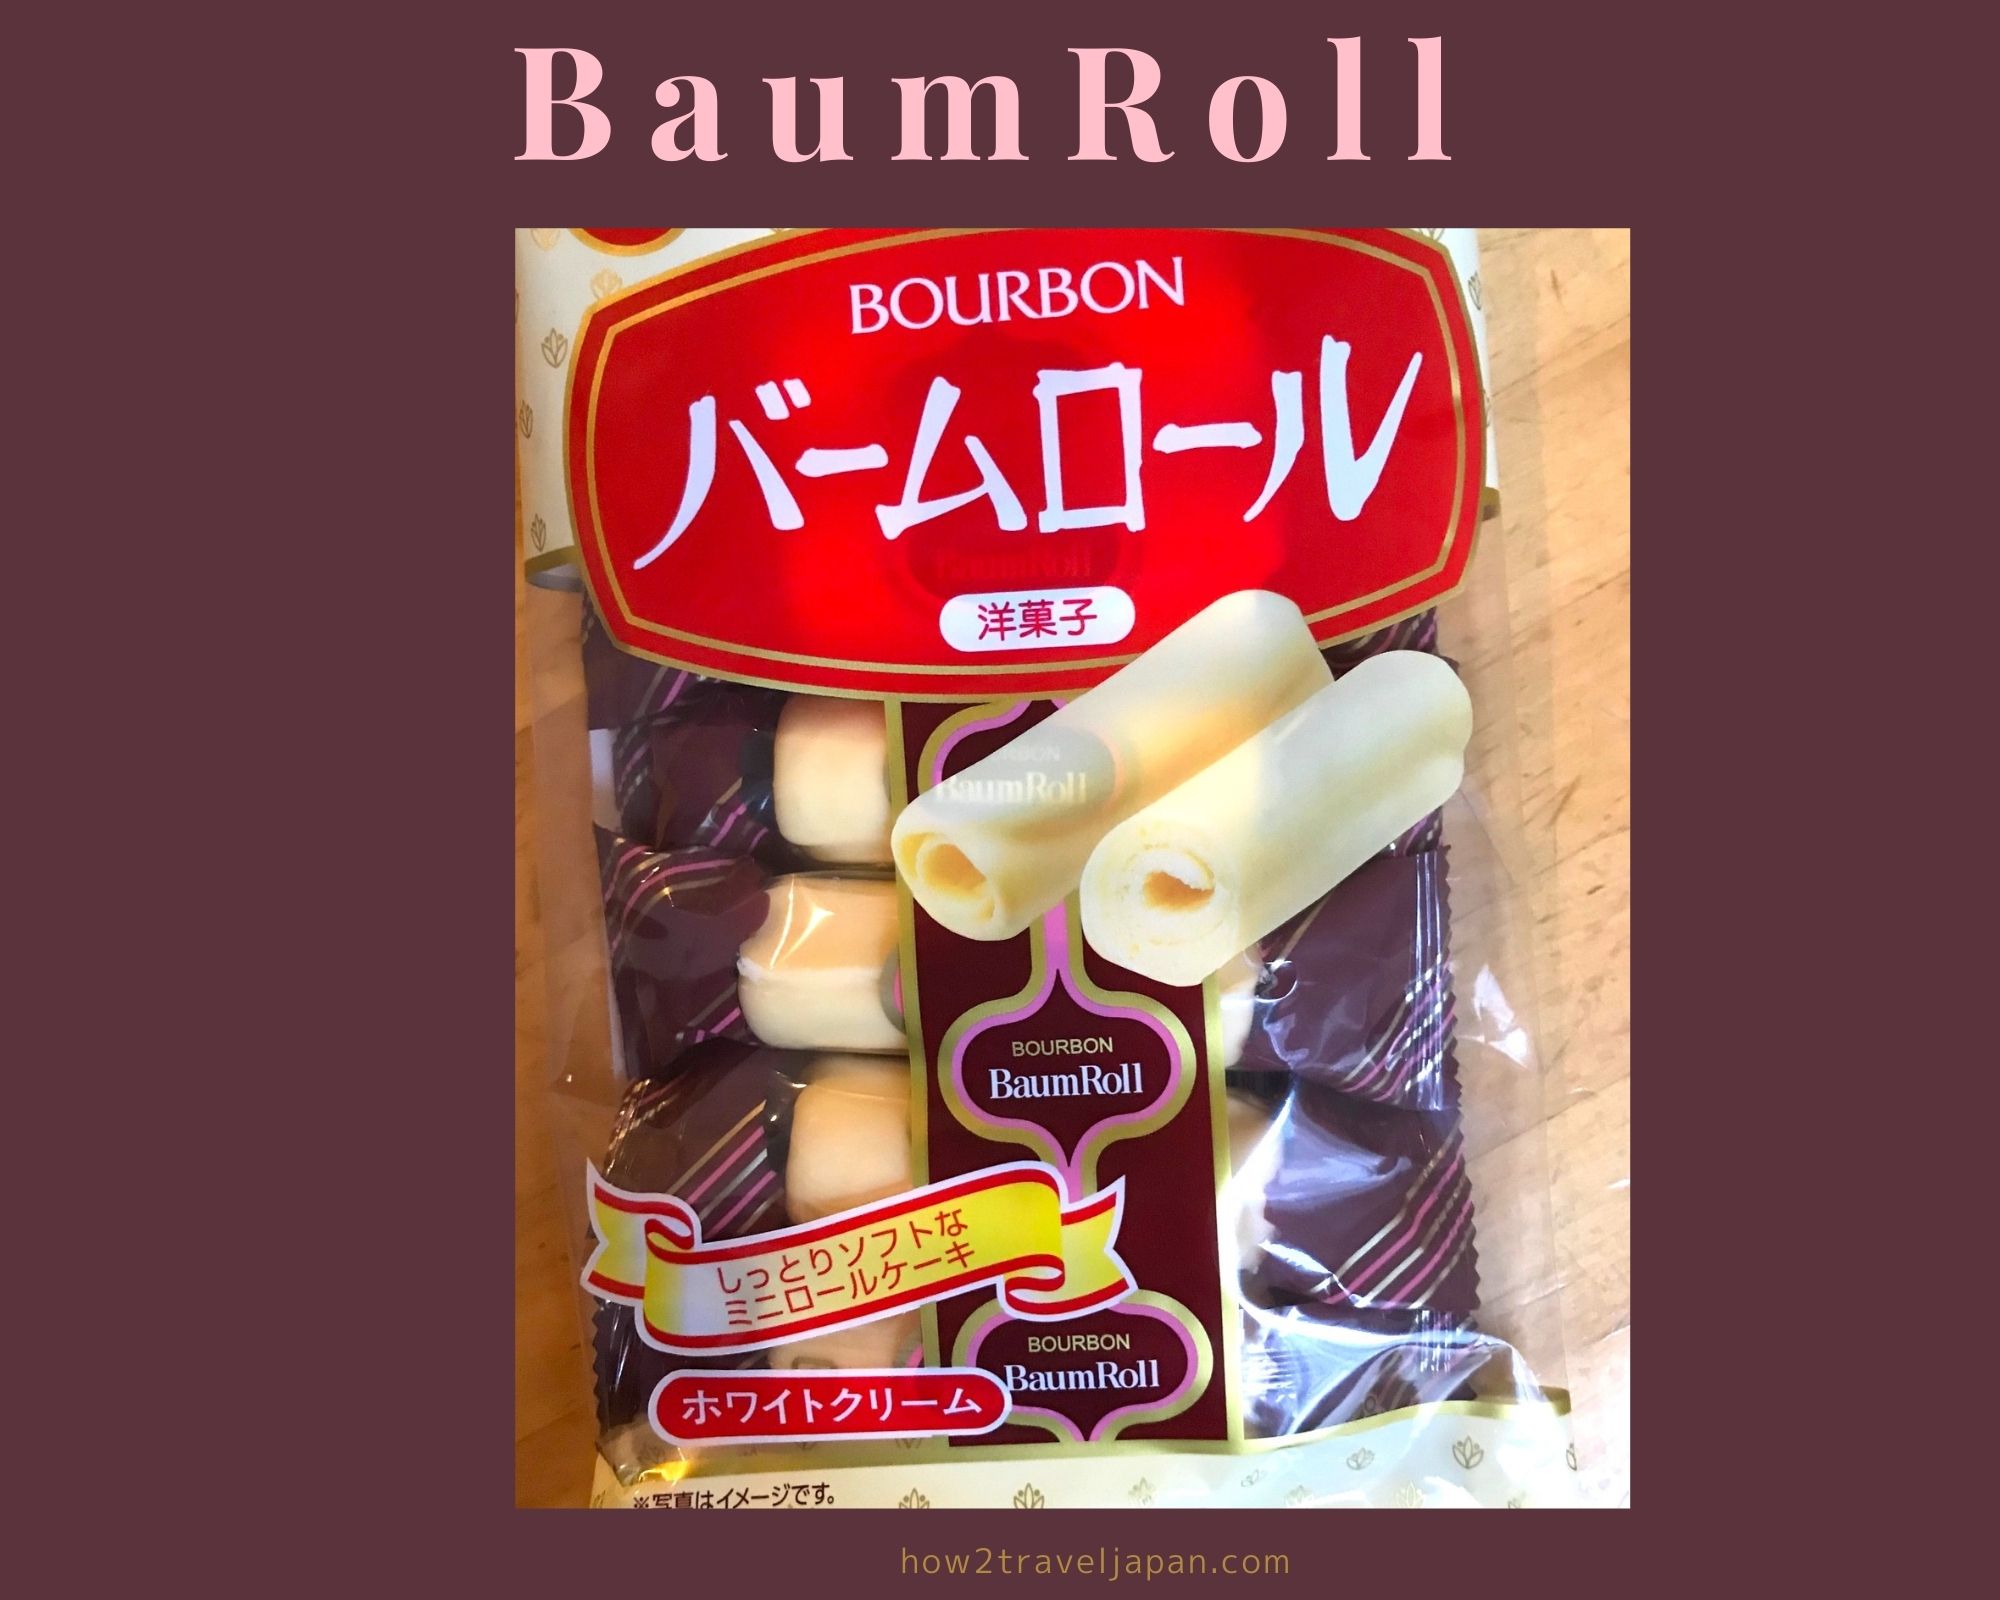 You are currently viewing Baum Roll from Bourbon, beloved sweet in Japan for over 40 years